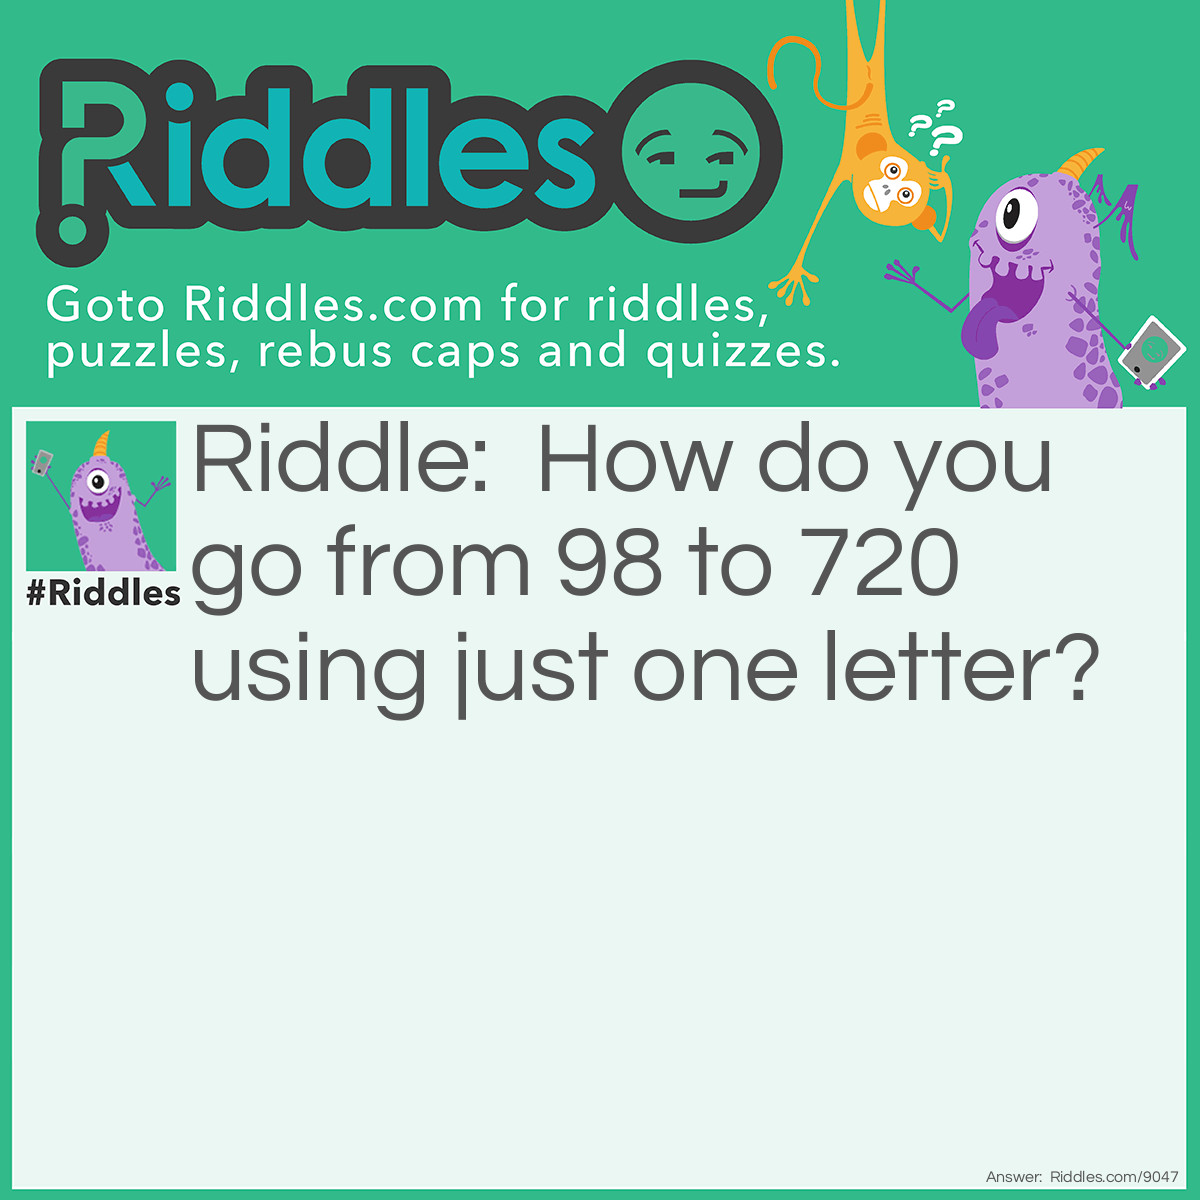 Riddle: How do you go from 98 to 720 using just one letter? Answer: Add an "x" between "ninety" and "eight". Ninety x Eight = 720